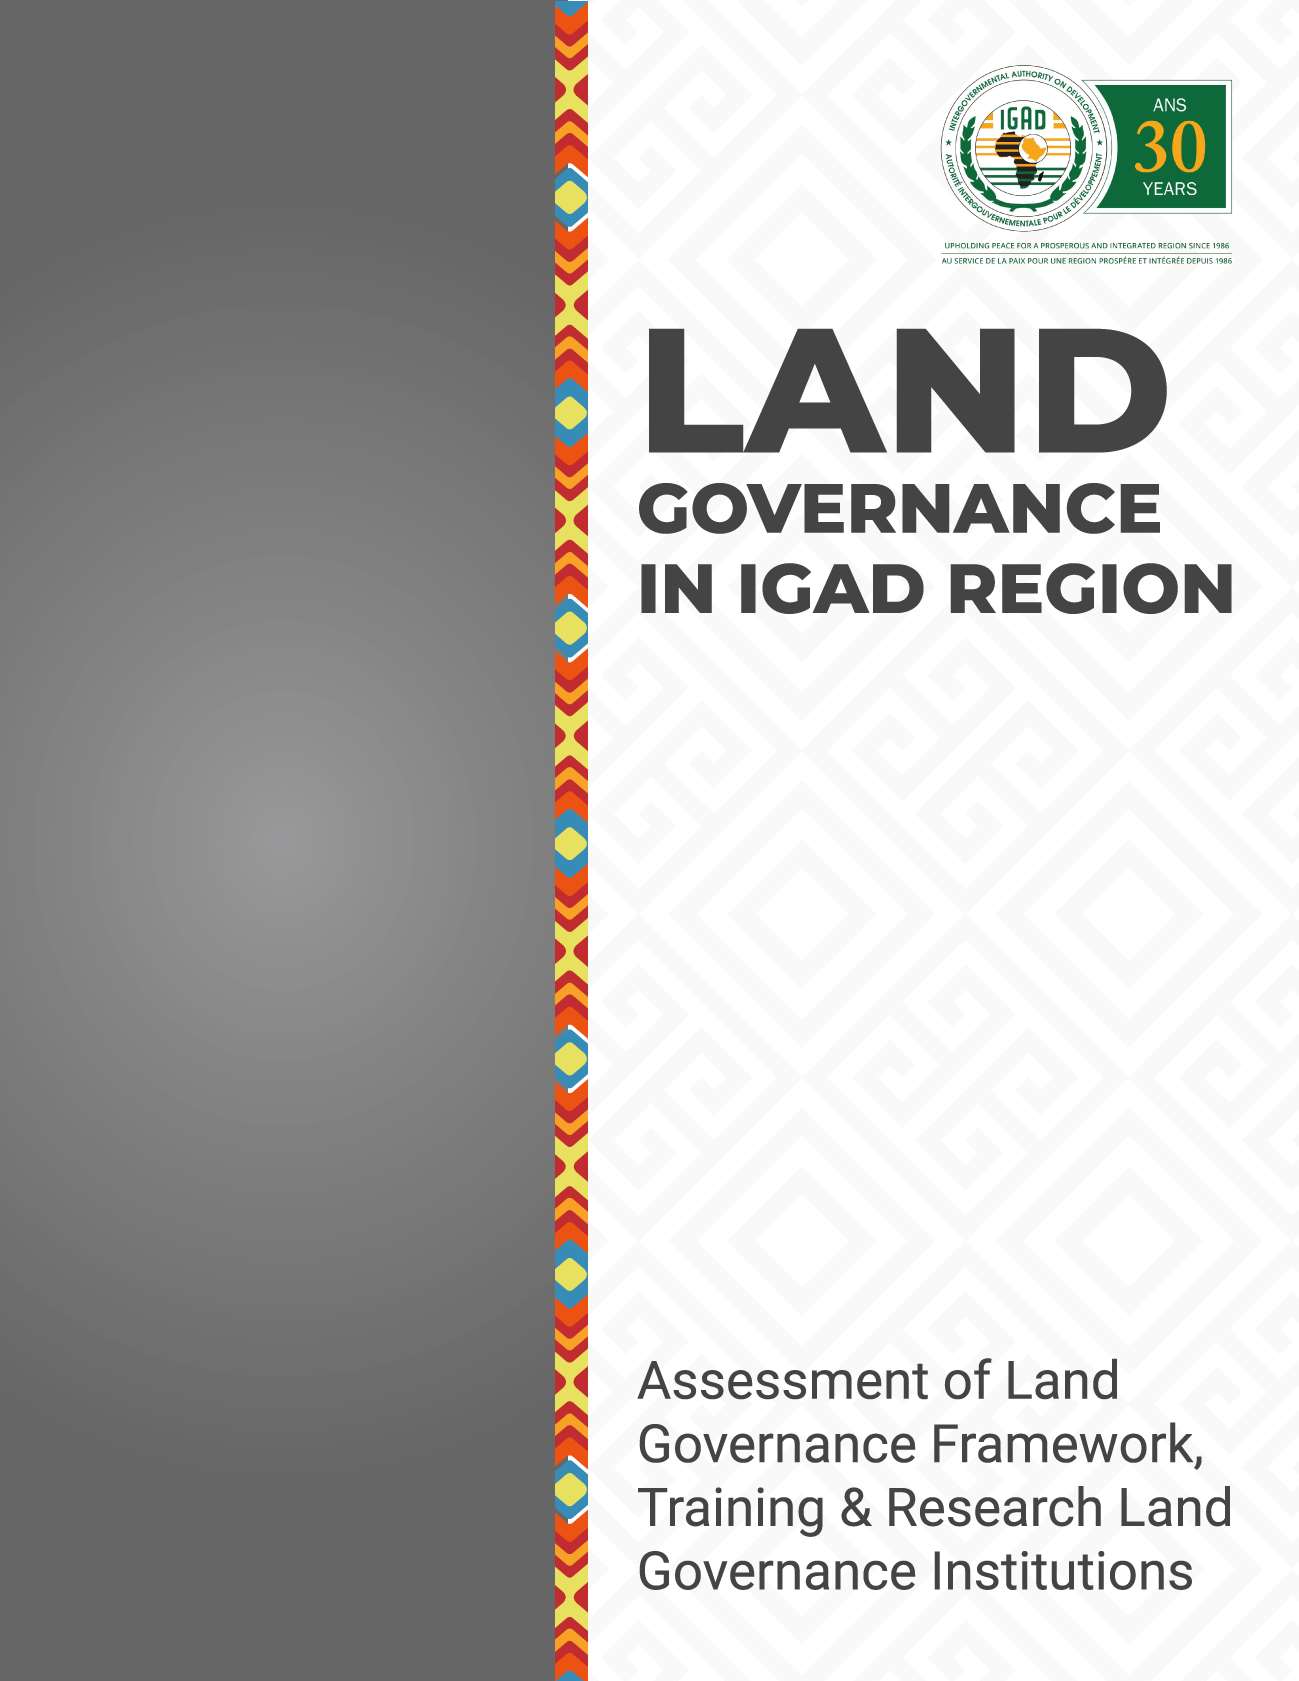 Land Governance in IGAD Region   Djibouti Country Profile